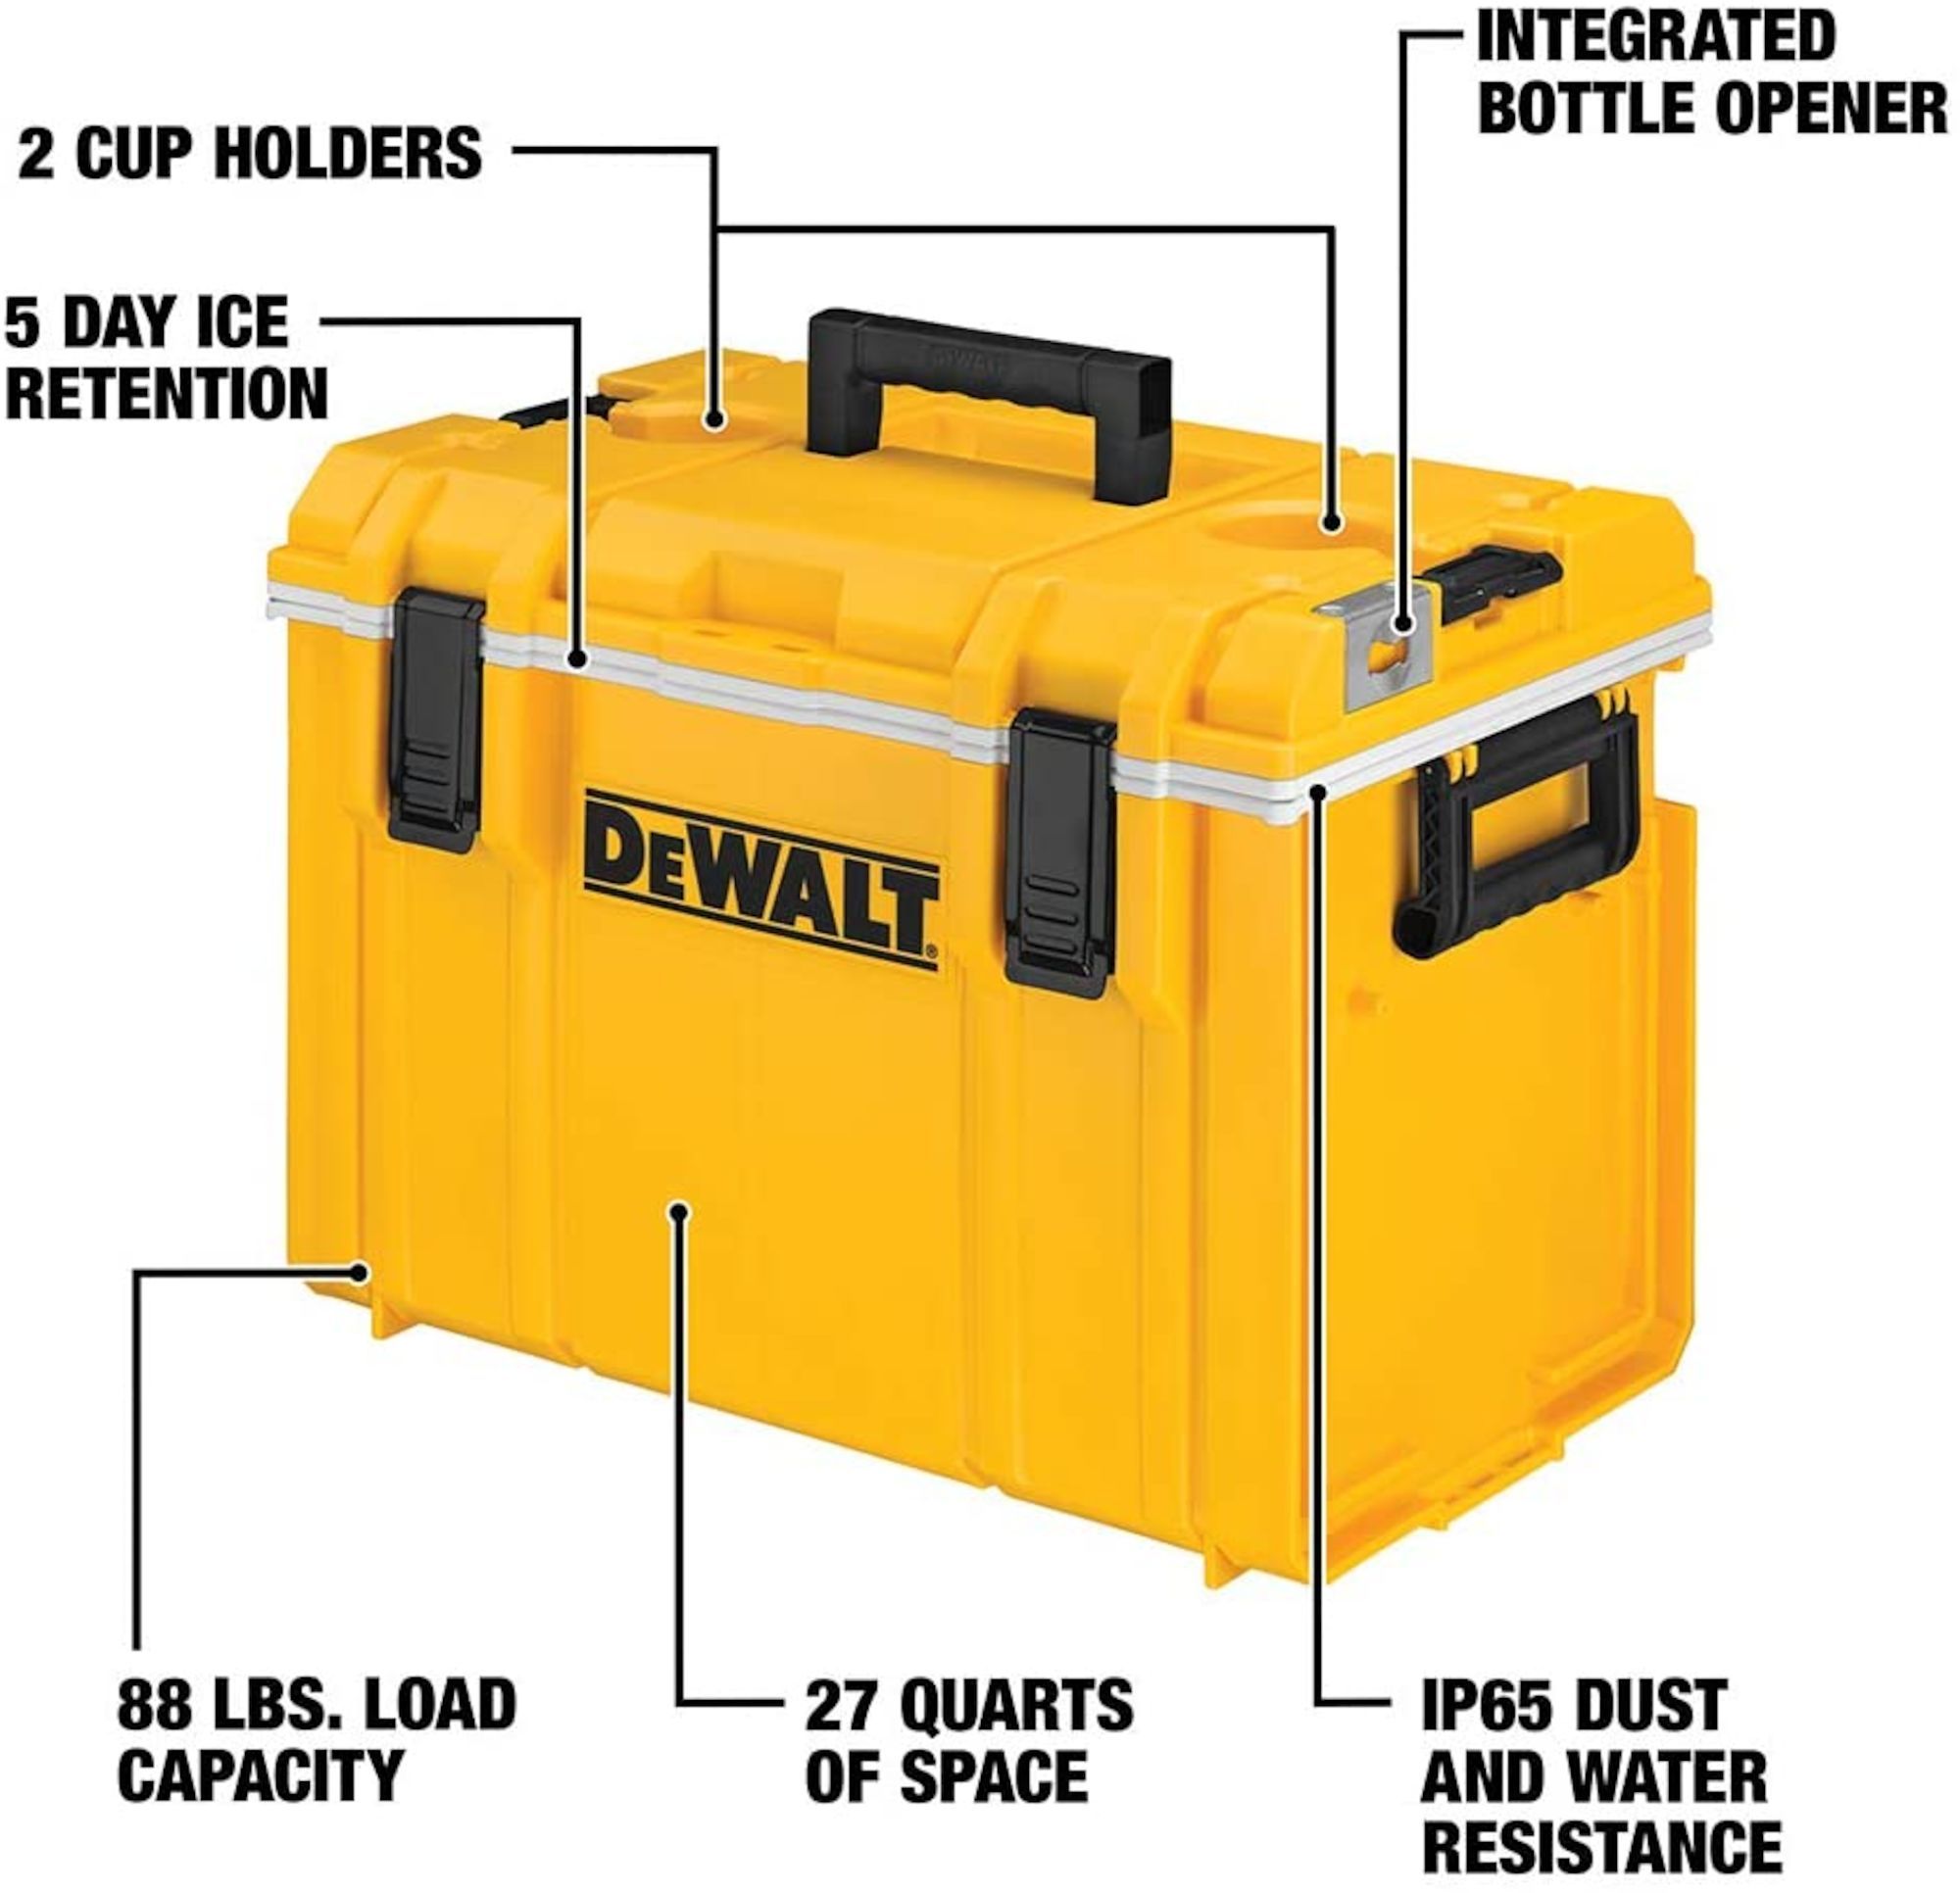 Toughsystem 22-Inch Tool Box Cooler from DEWALT